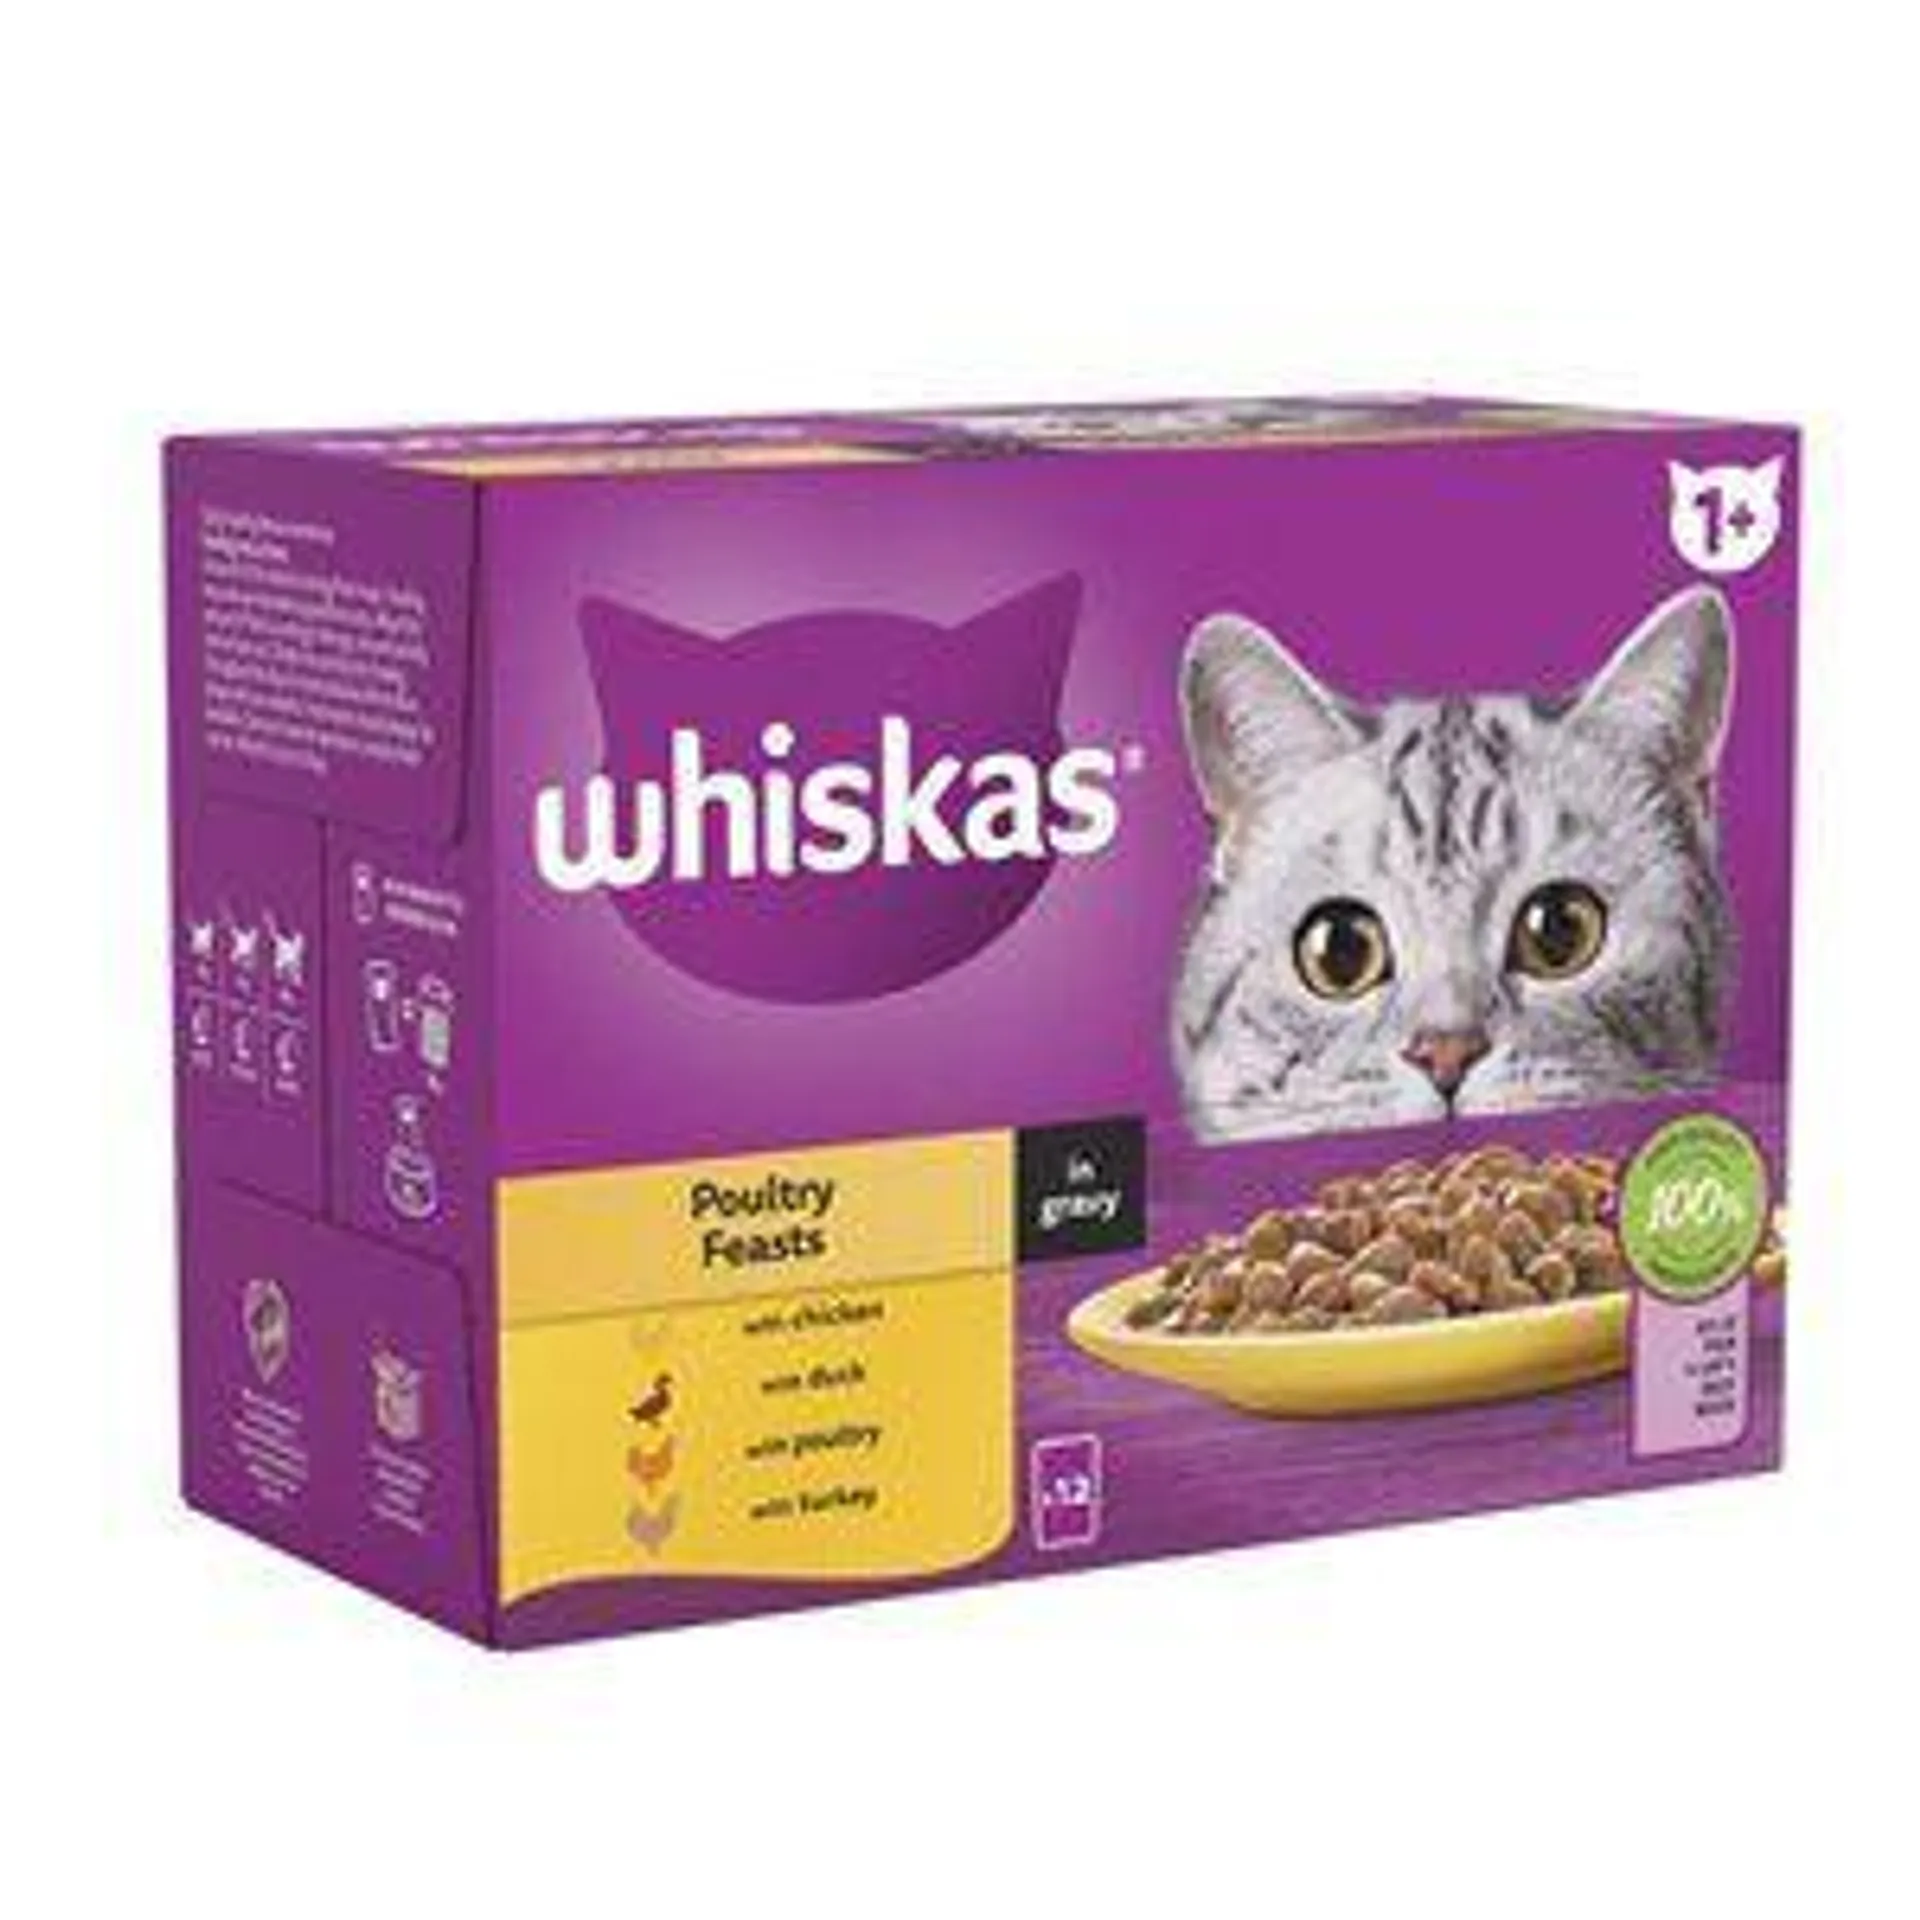 Whiskas 1+ Poultry Feasts In Gravy Multipack